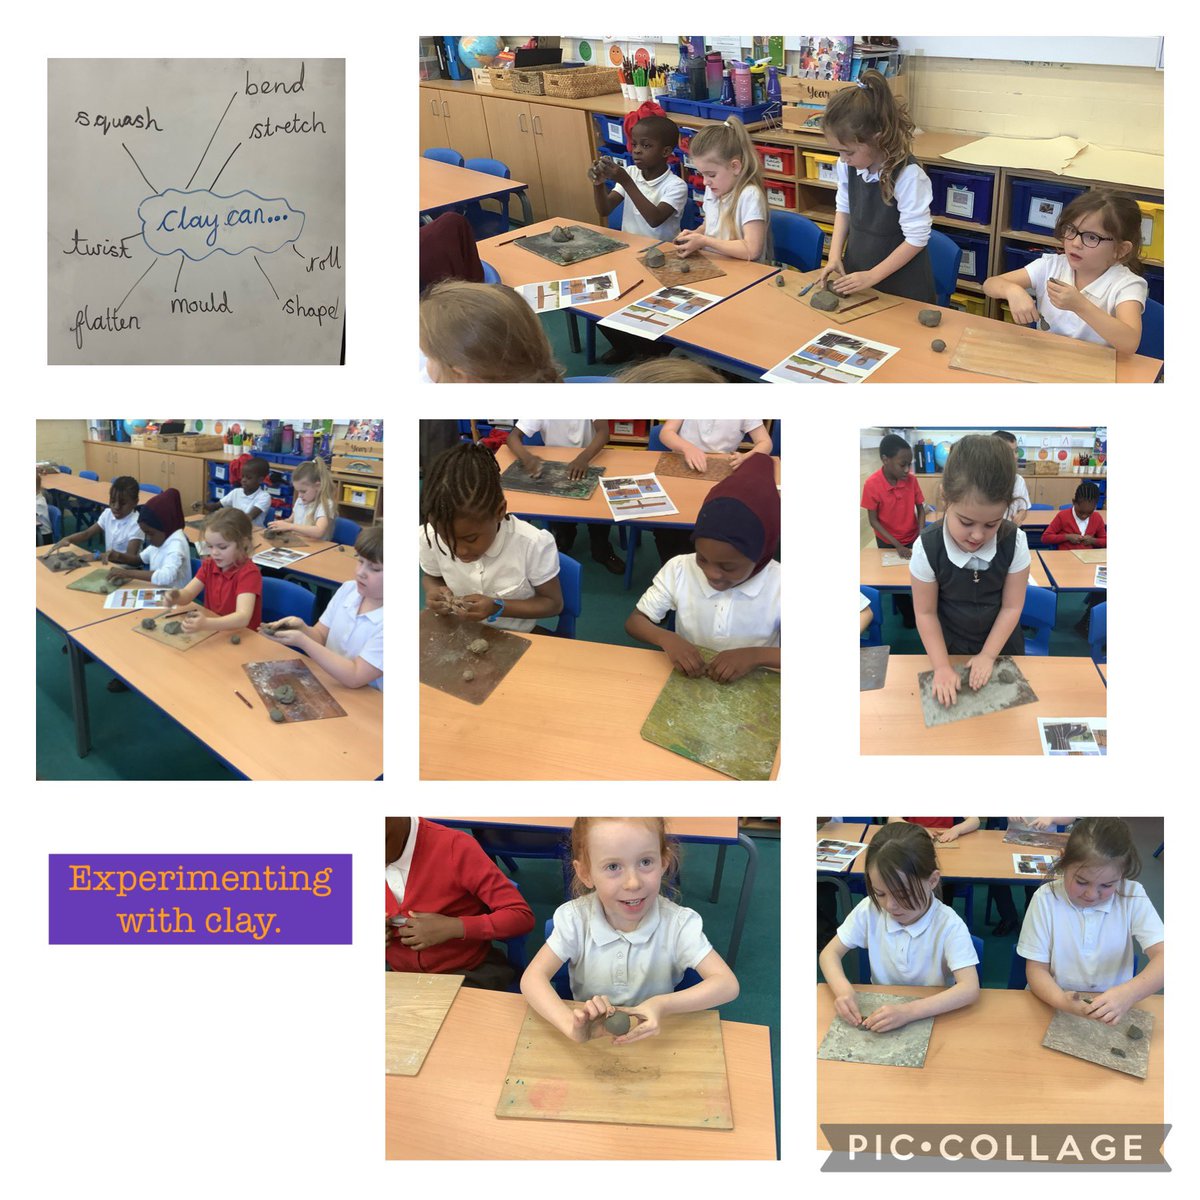 Today we have explored using clay in our art lesson. @FallaParkSchool @Miss_Carr_Falla @MrsMcMillanFP